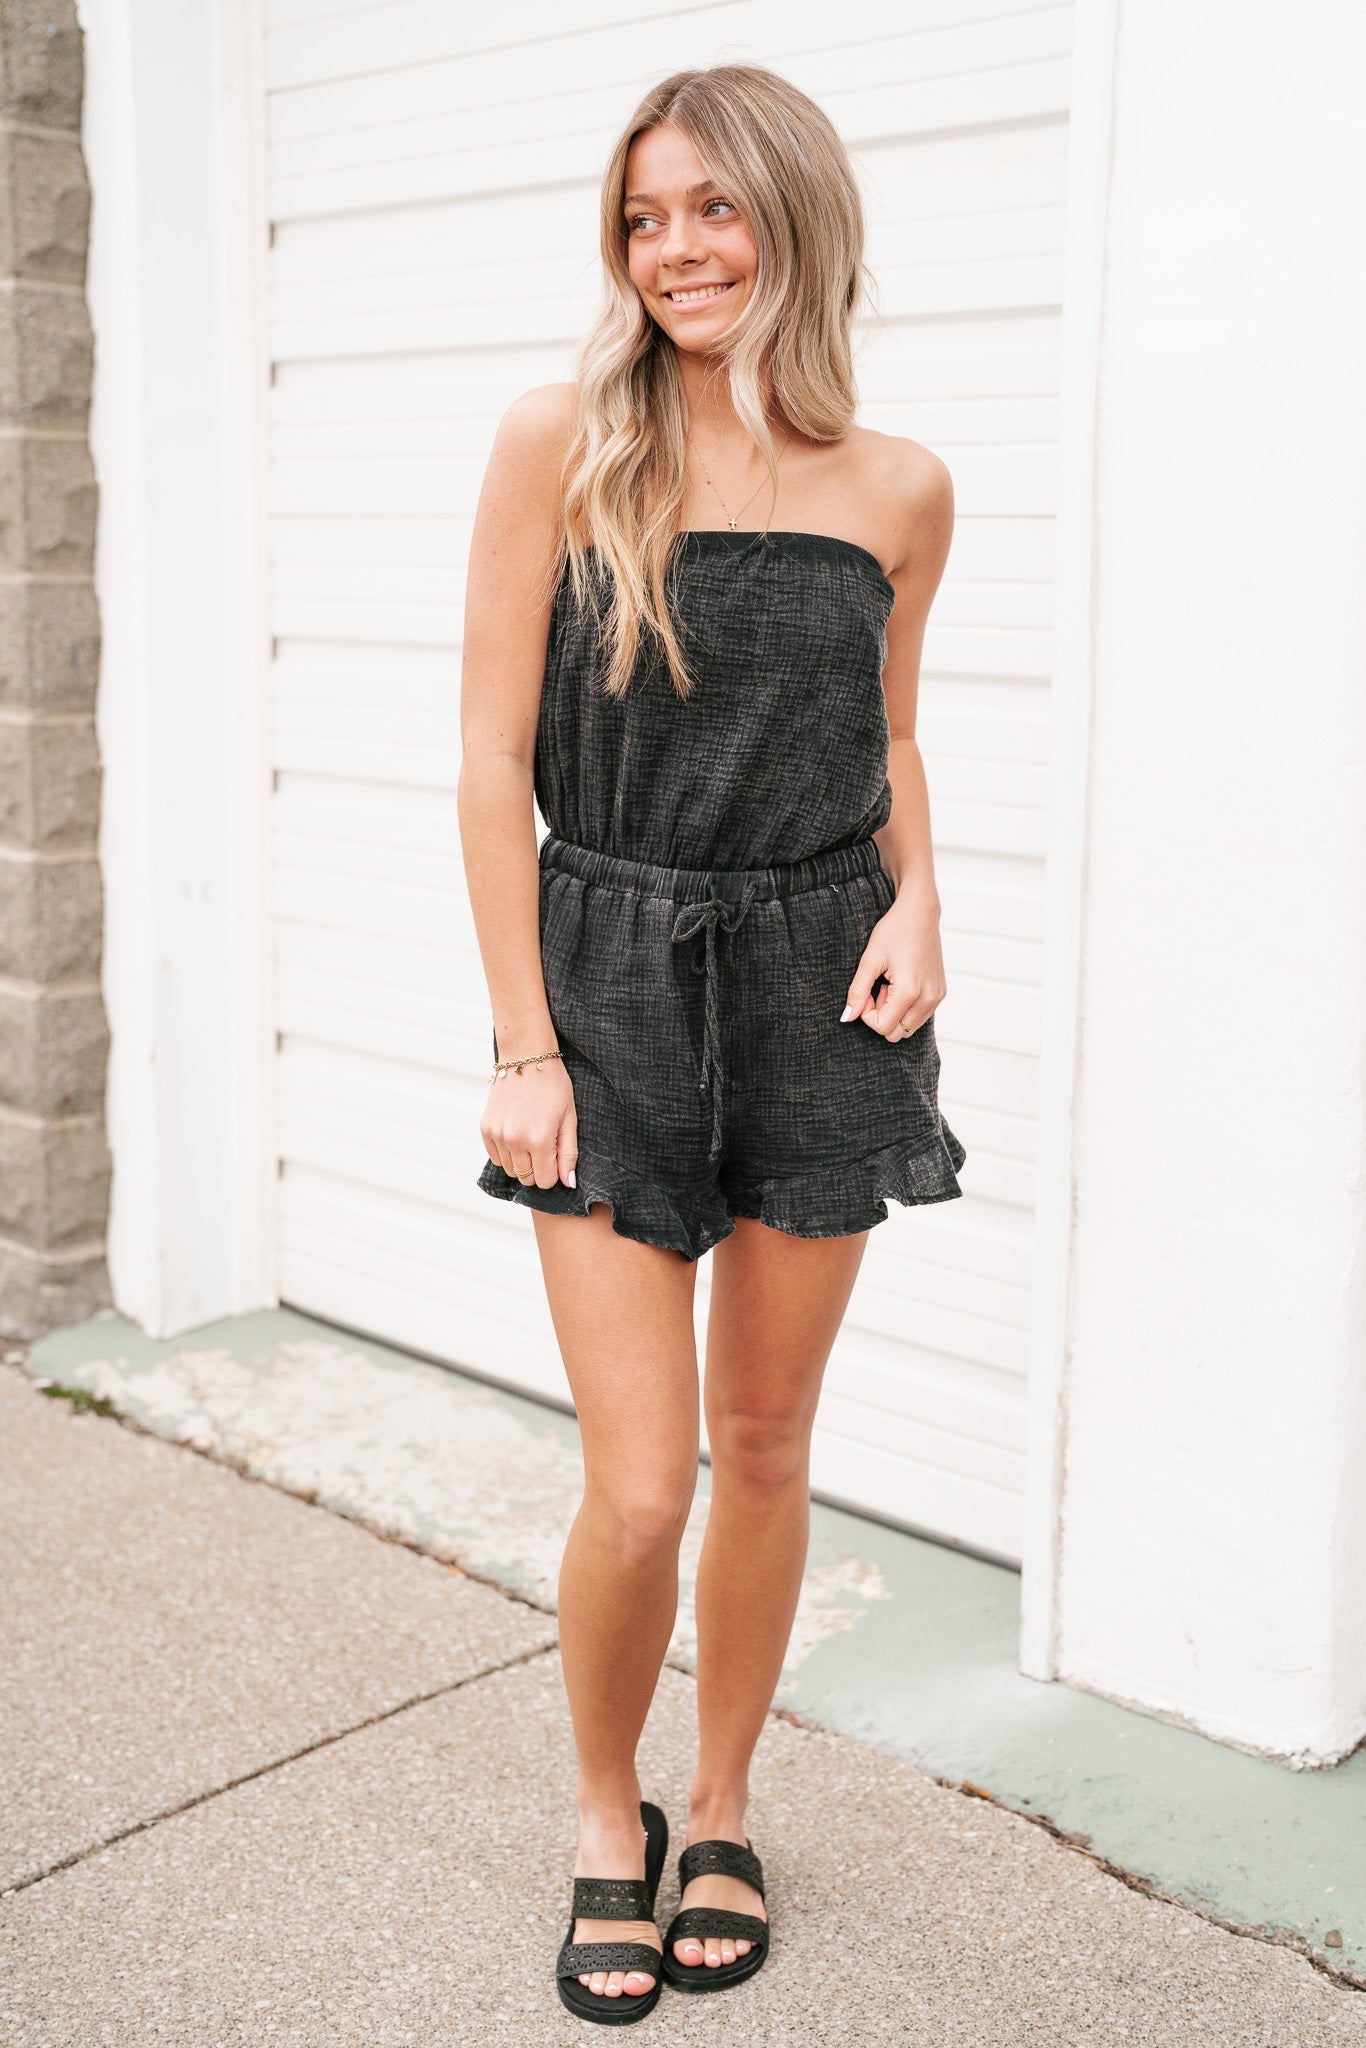 Remind Me Later Strapless Romper